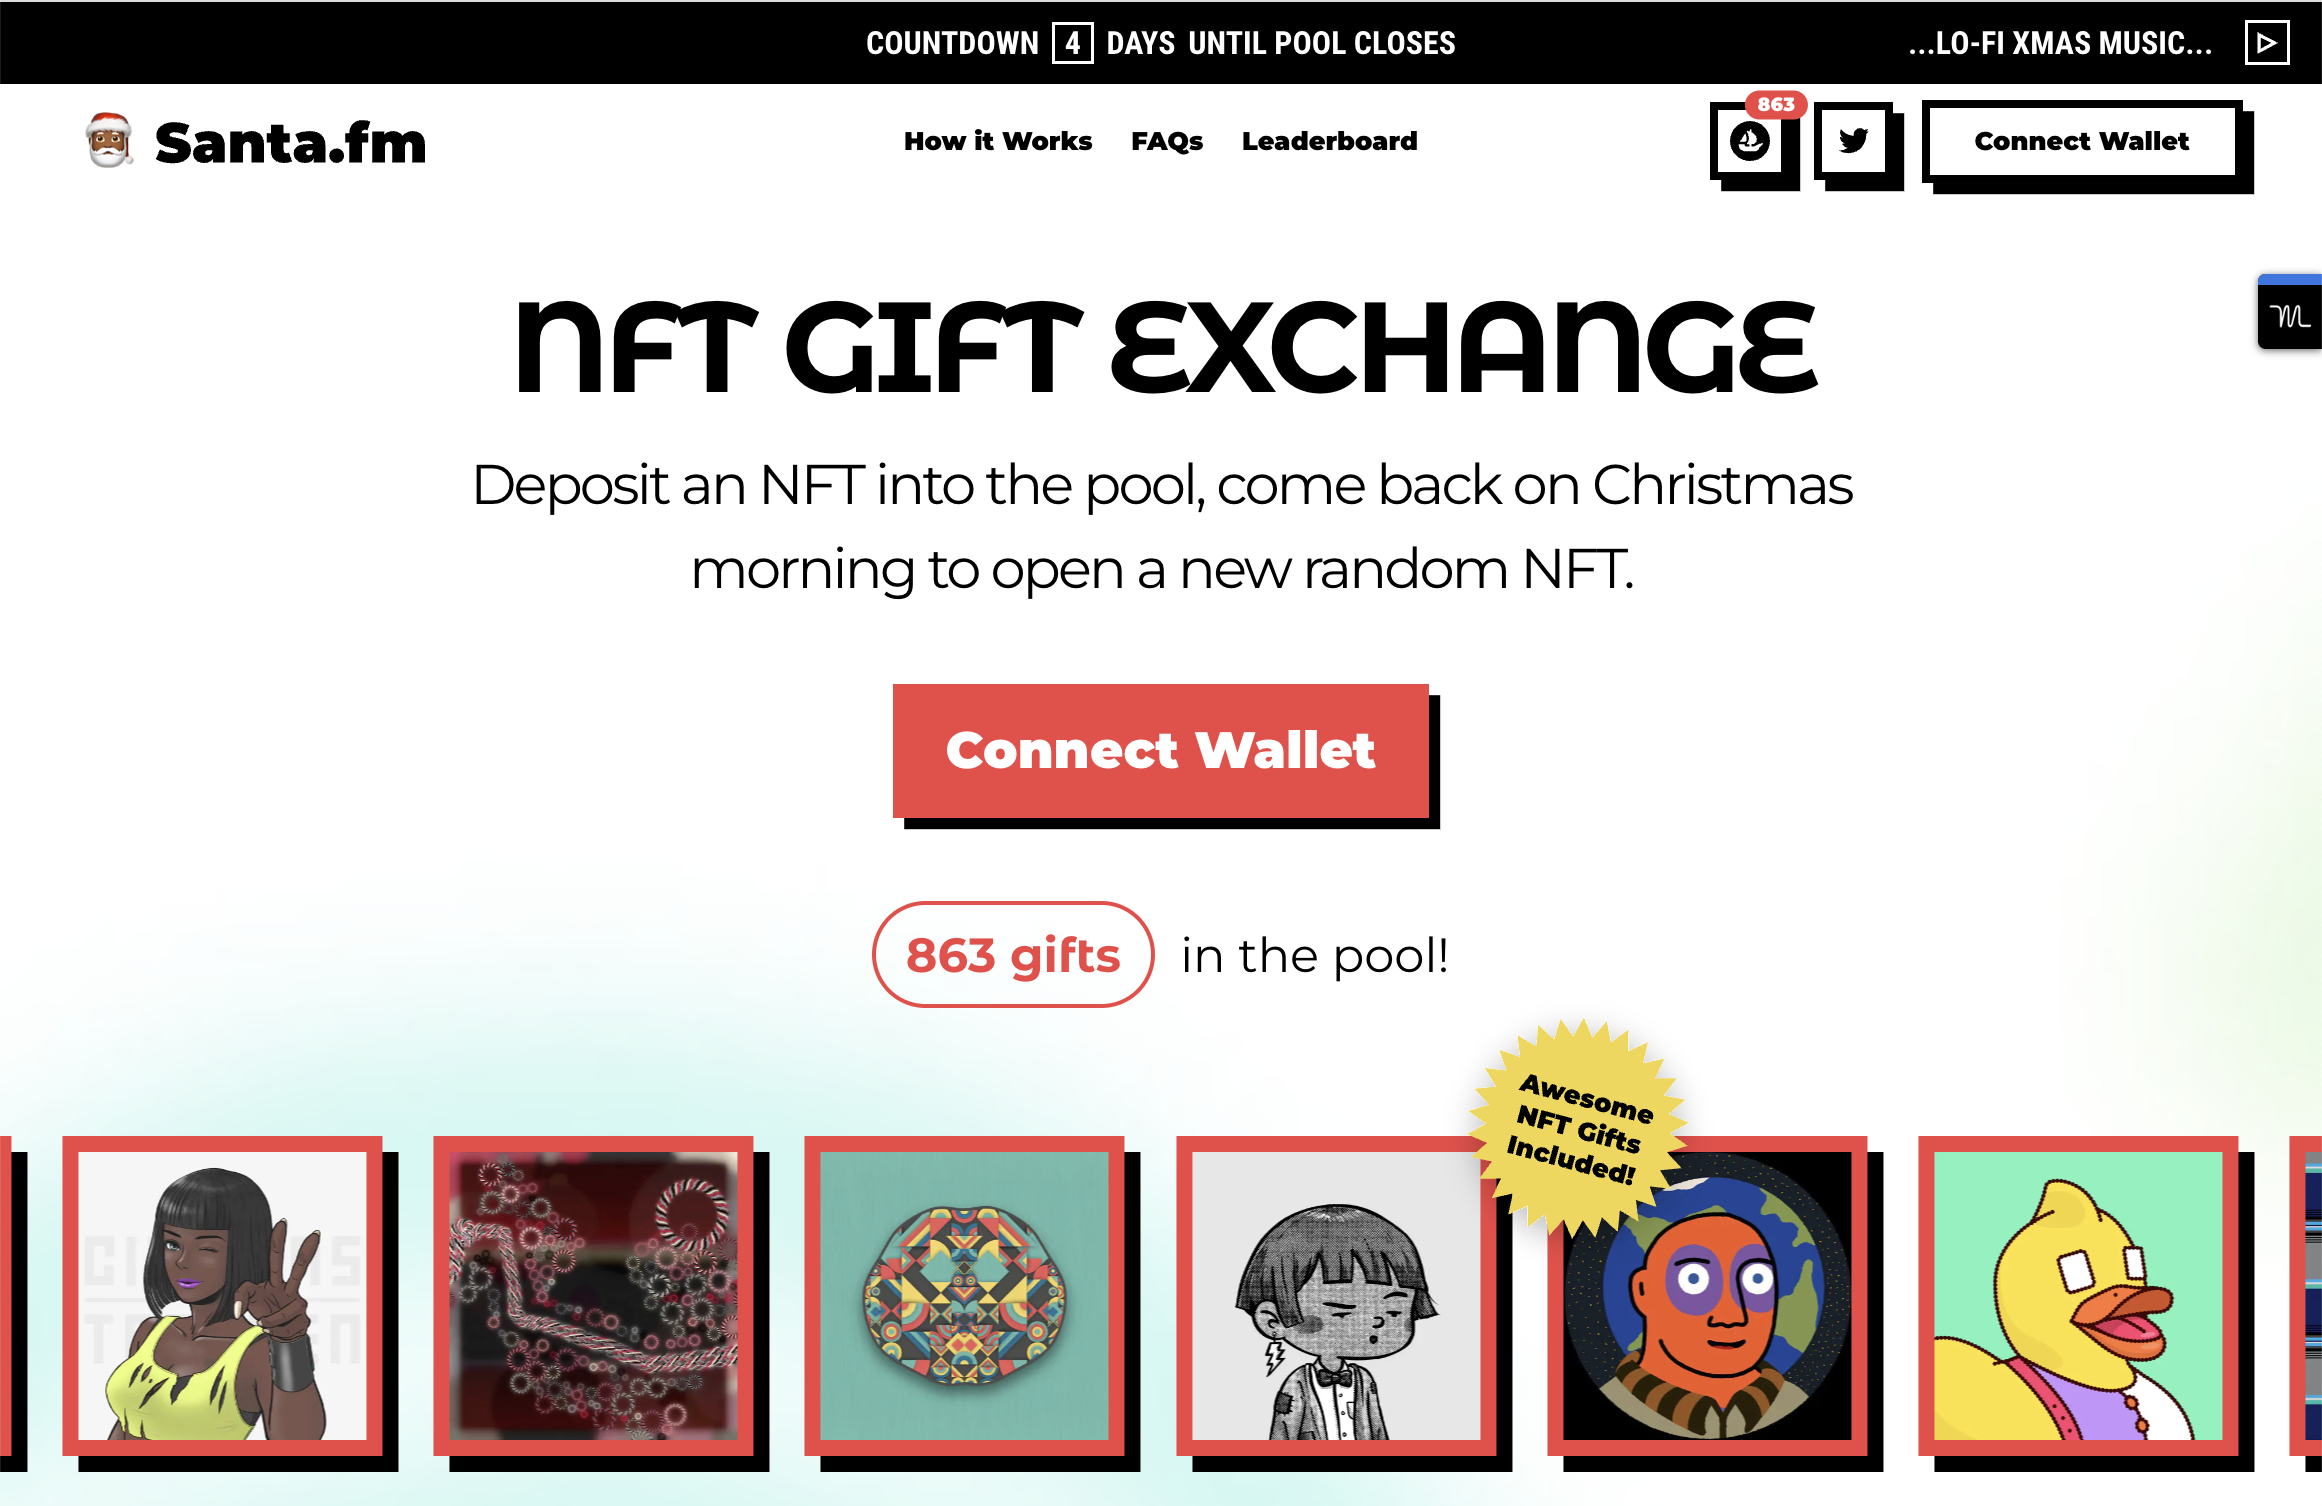 Give an NFT. Get an NFT. Then come back on Christmas day for a random gift.